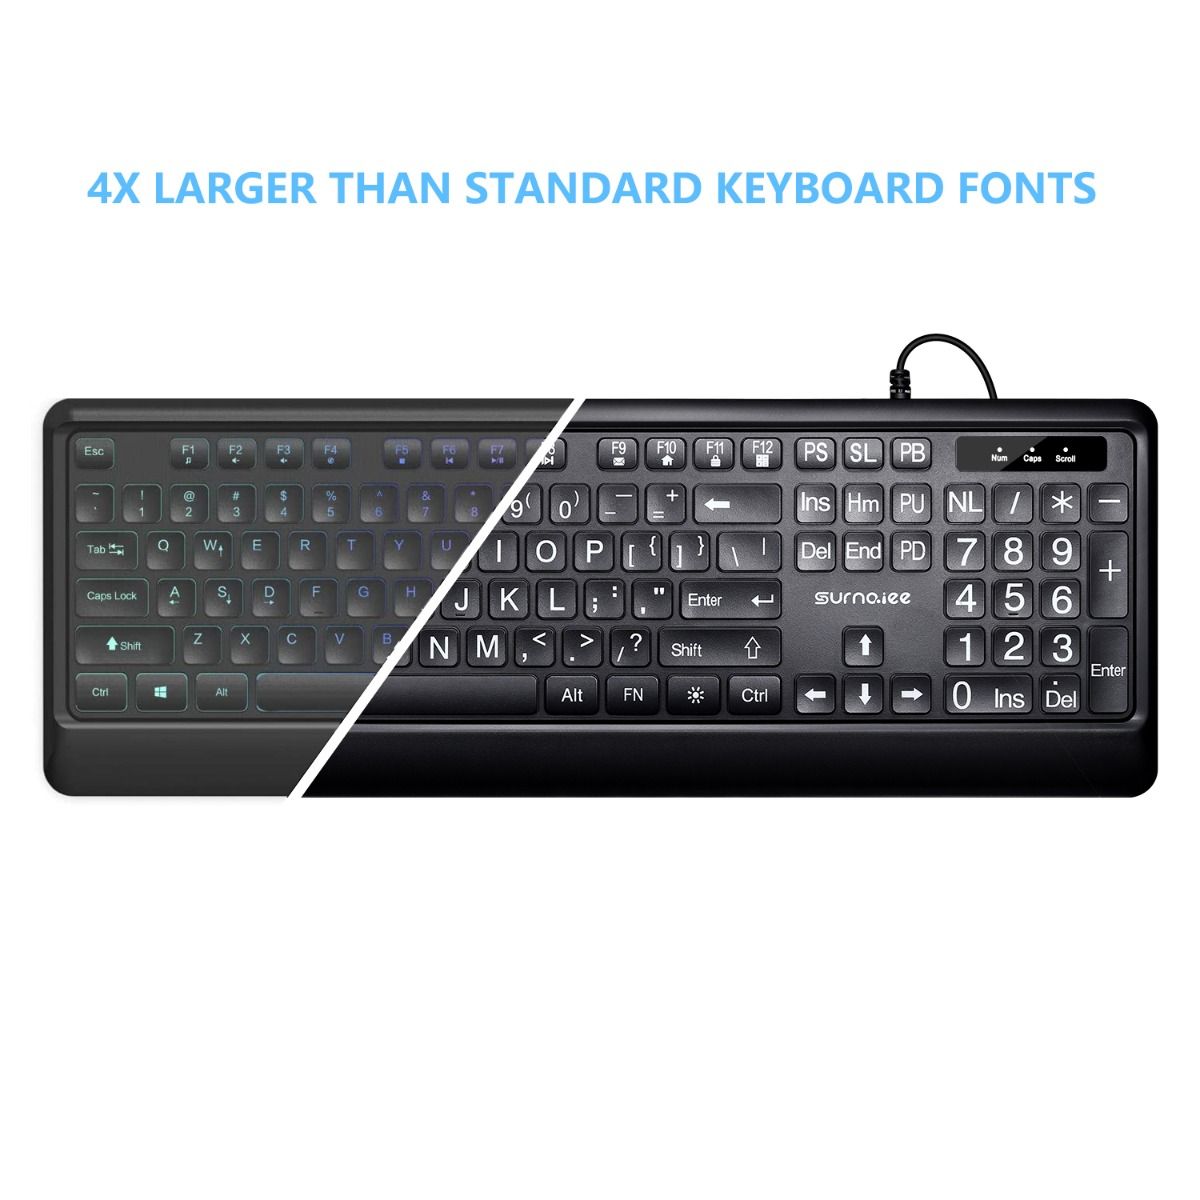 White Backlit Large Letter Keyboard: A Boon for the Visually Impaired